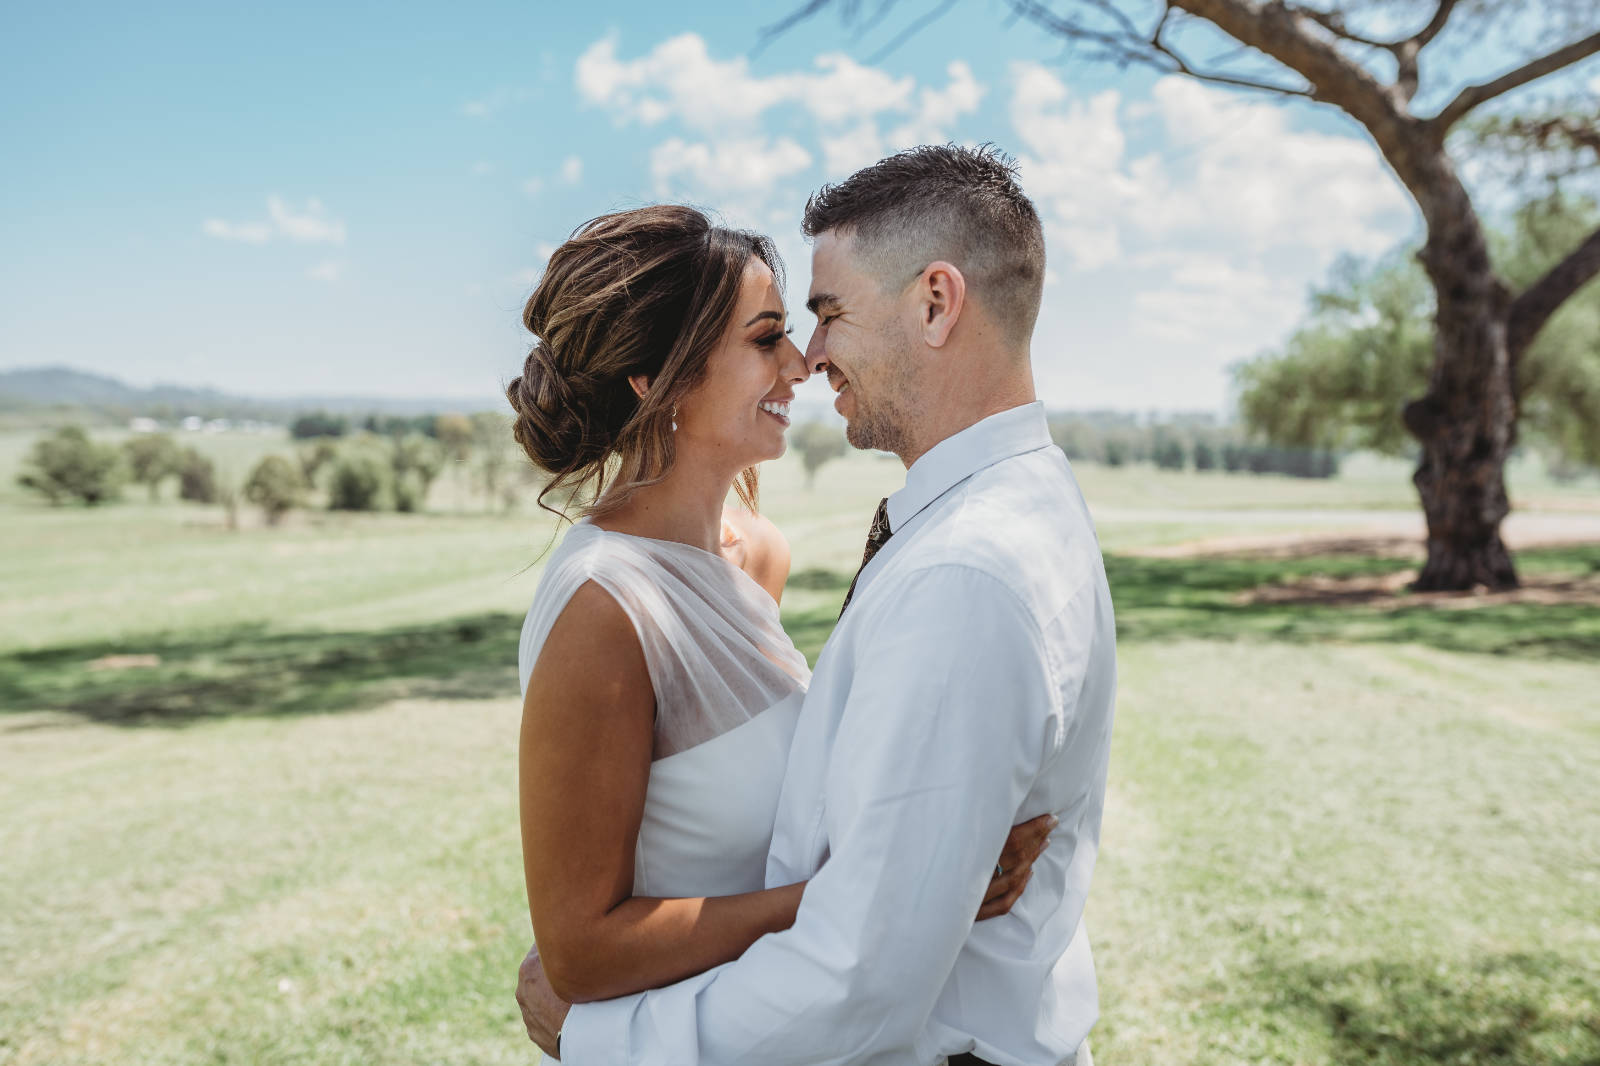 Burnham Grove Estate elopement for Jess and Andrew, Camden NSW, photographed by Puzzleman Productions.